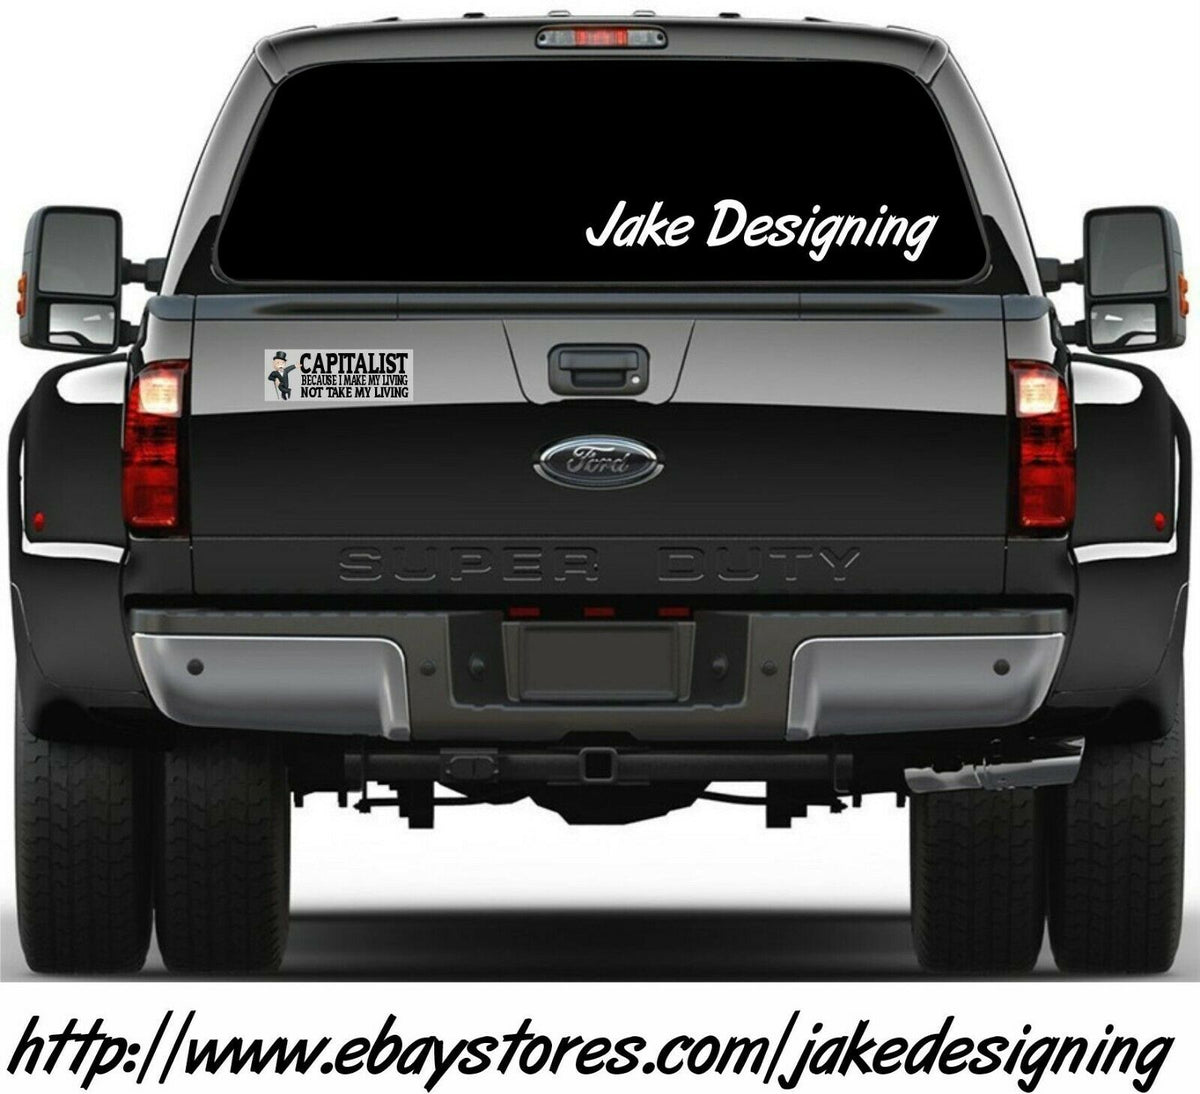 Capitalist Conservative "Make my living not take my living" AUTO MAGNET 8.6x3 - Powercall Sirens LLC